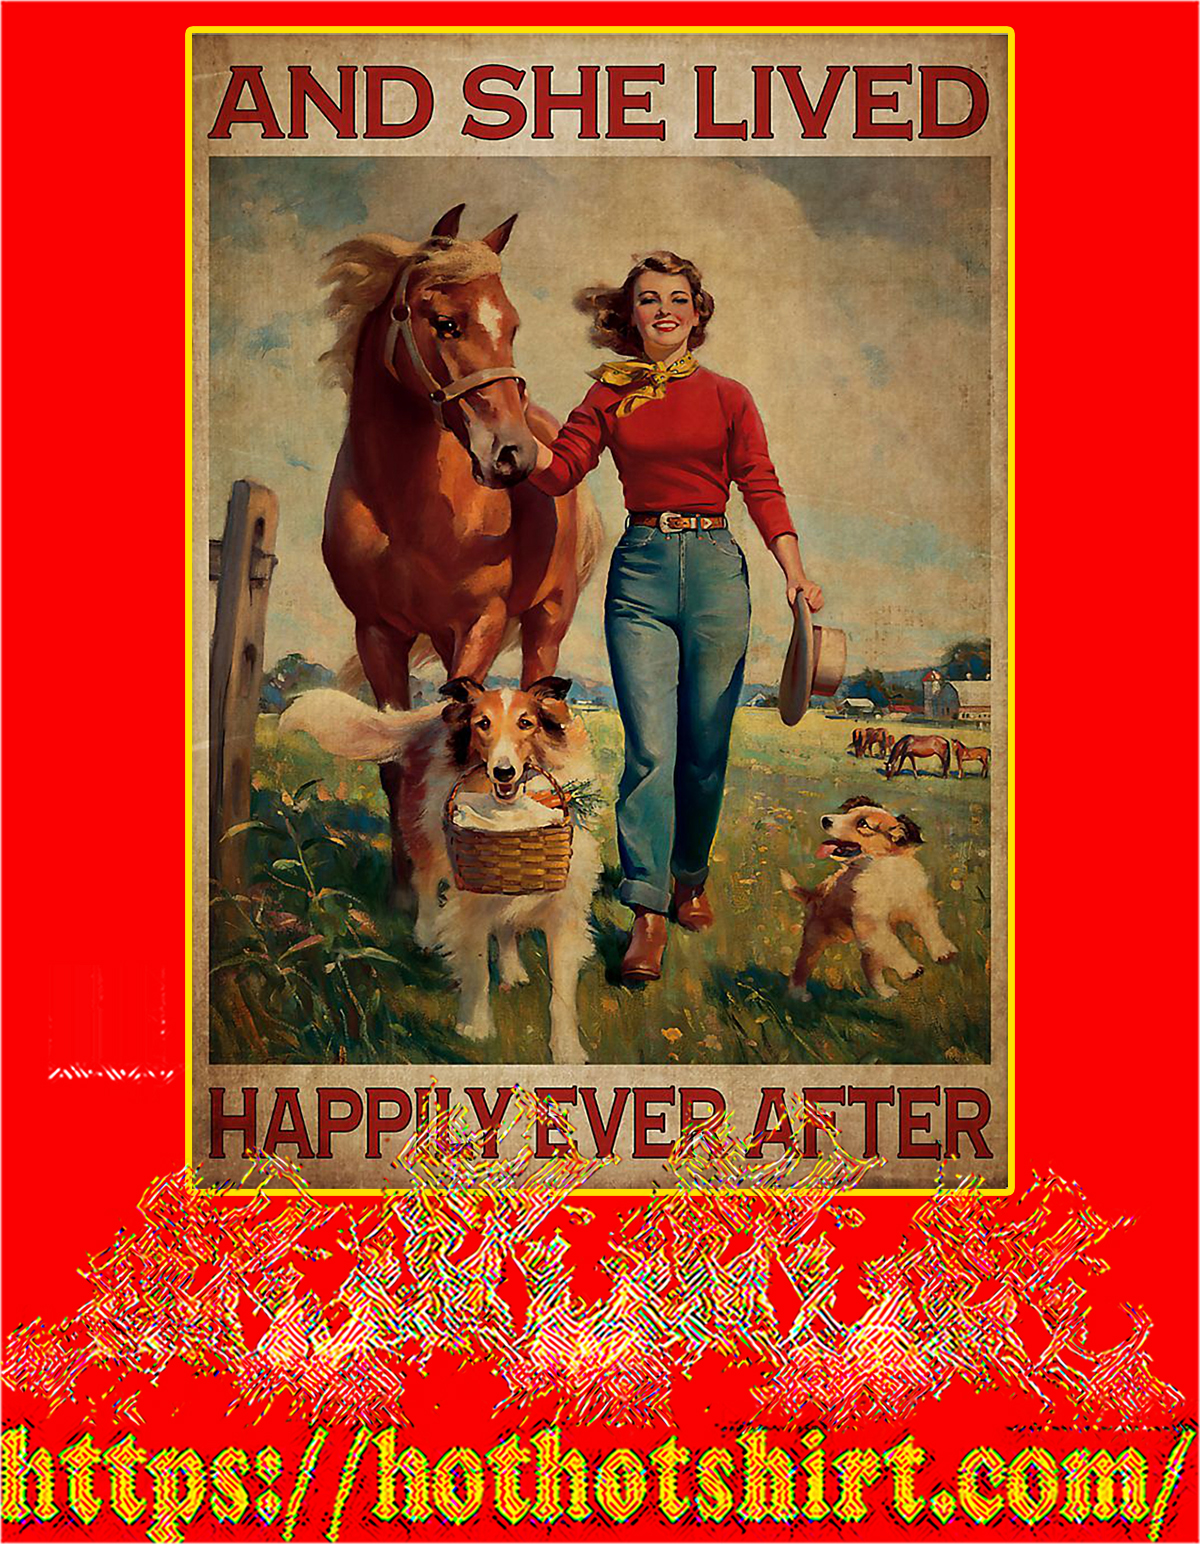 Girl with horse and dog lived happily ever after poster